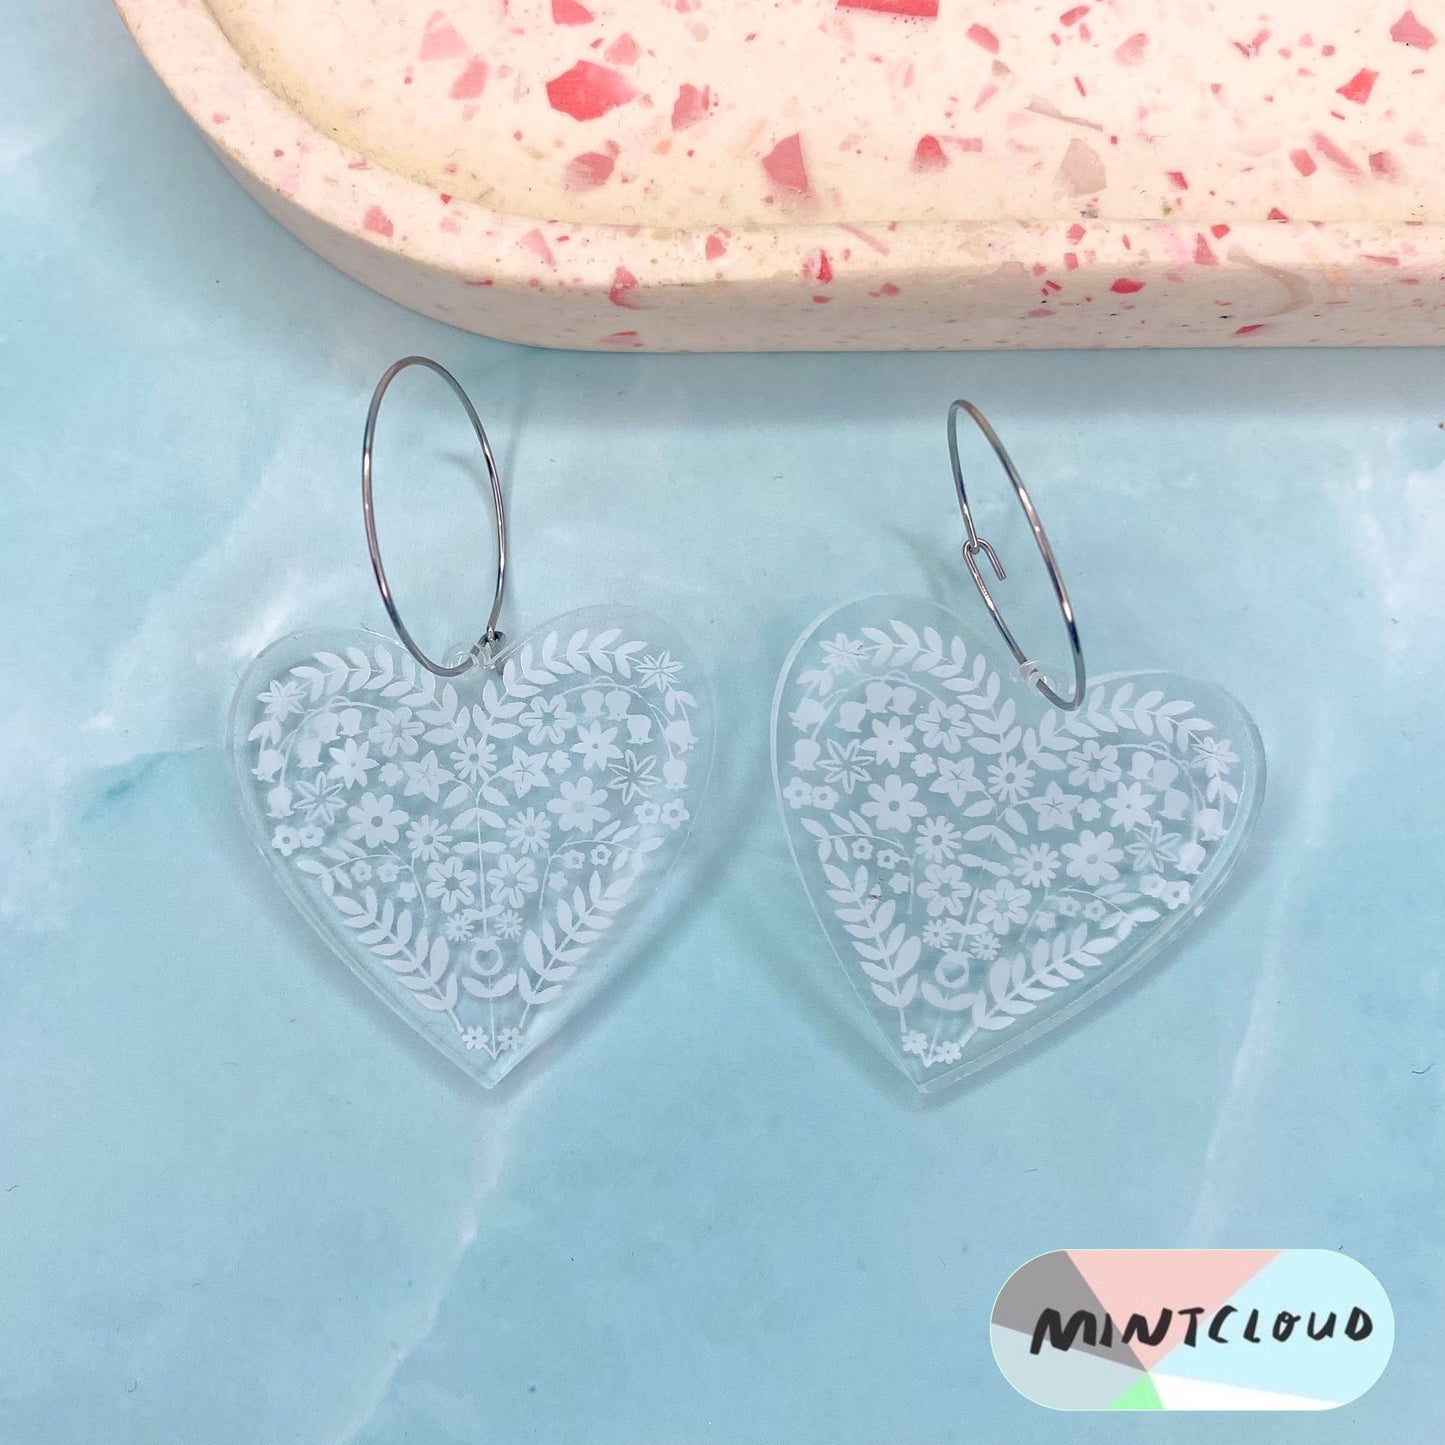 Etched Hearts Dangles - Various Colours From Mintcloud Studio, an online jewellery store based in Adelaide South Australia